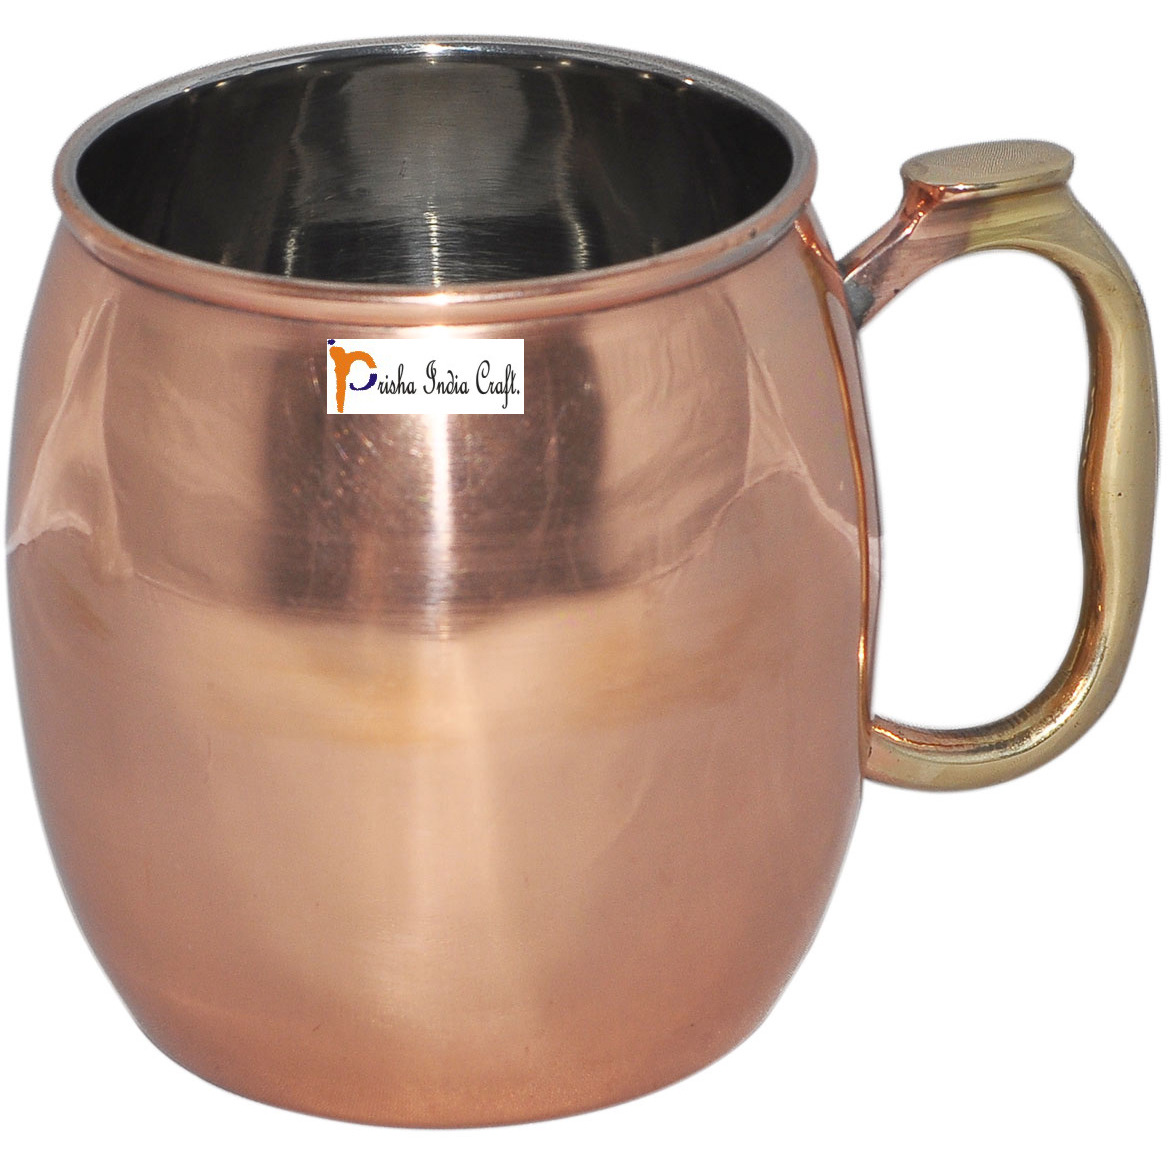 Set of 6 - Prisha India Craft B. Copper Plating Stainless Steel Best Quality MuleMug 550 ML / 18, Thumb HandlePremium Moscow Mule Copper Mug,Moscow Mule Cocktail Cup, Copper Mugs, Cocktail Mugs